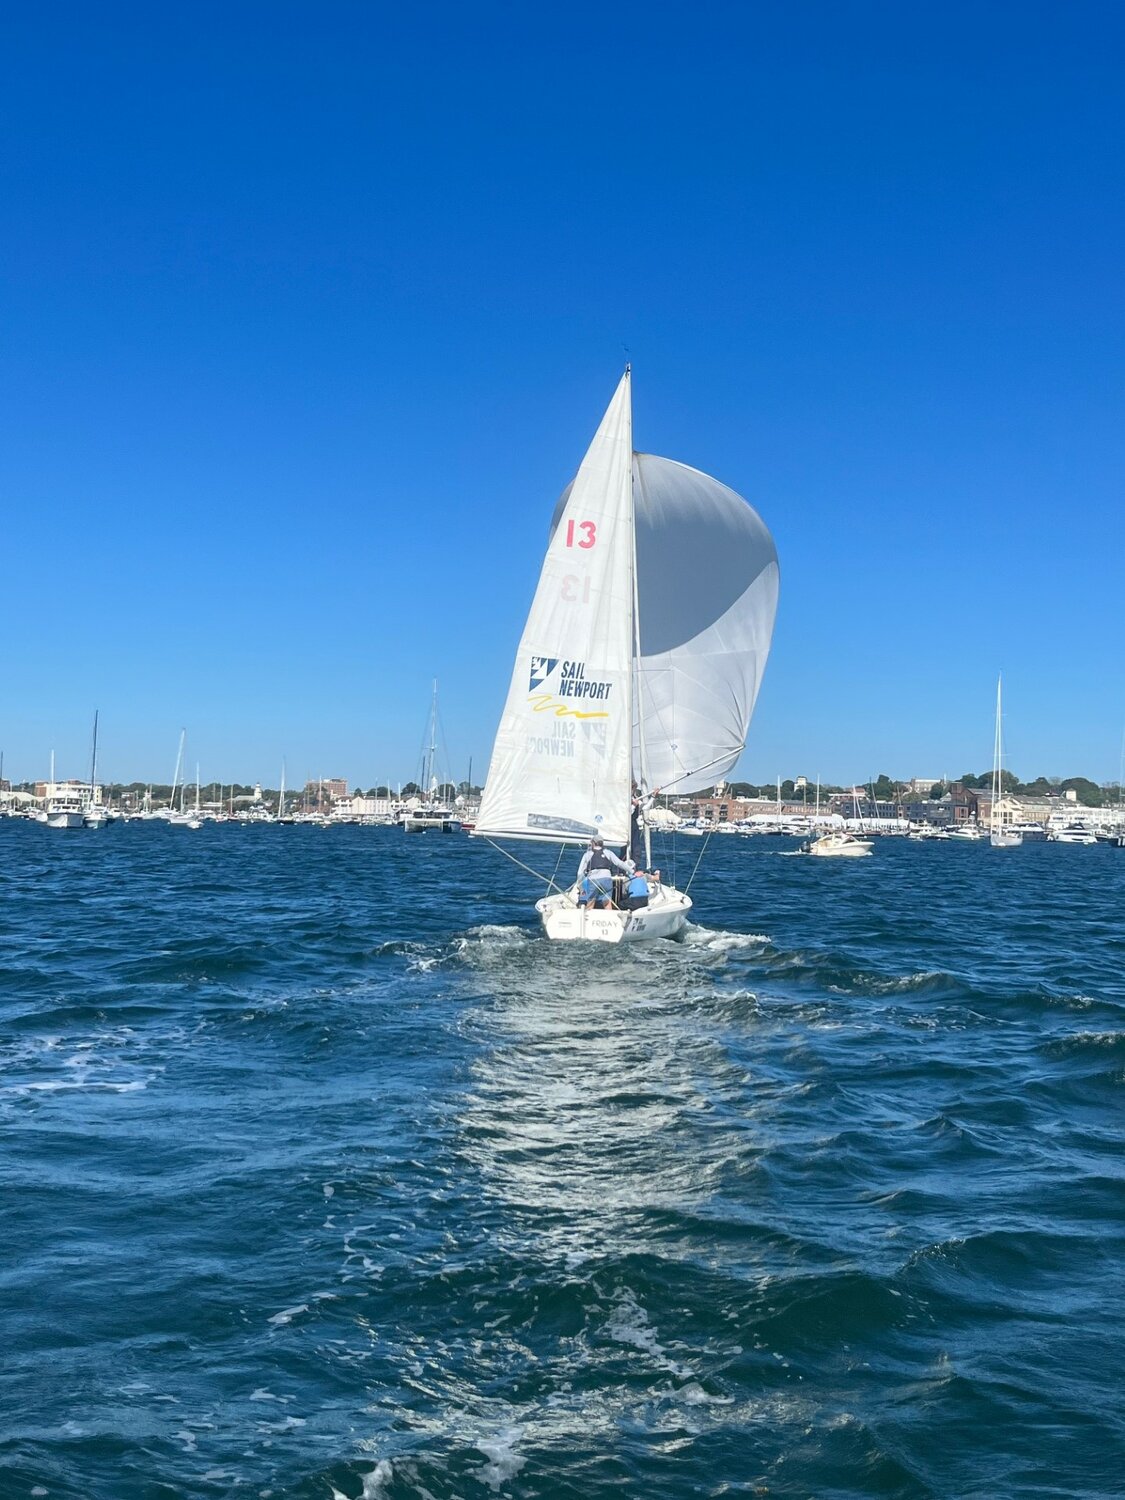 Members of the Barrington High School sailing team will compete for a national title next month.